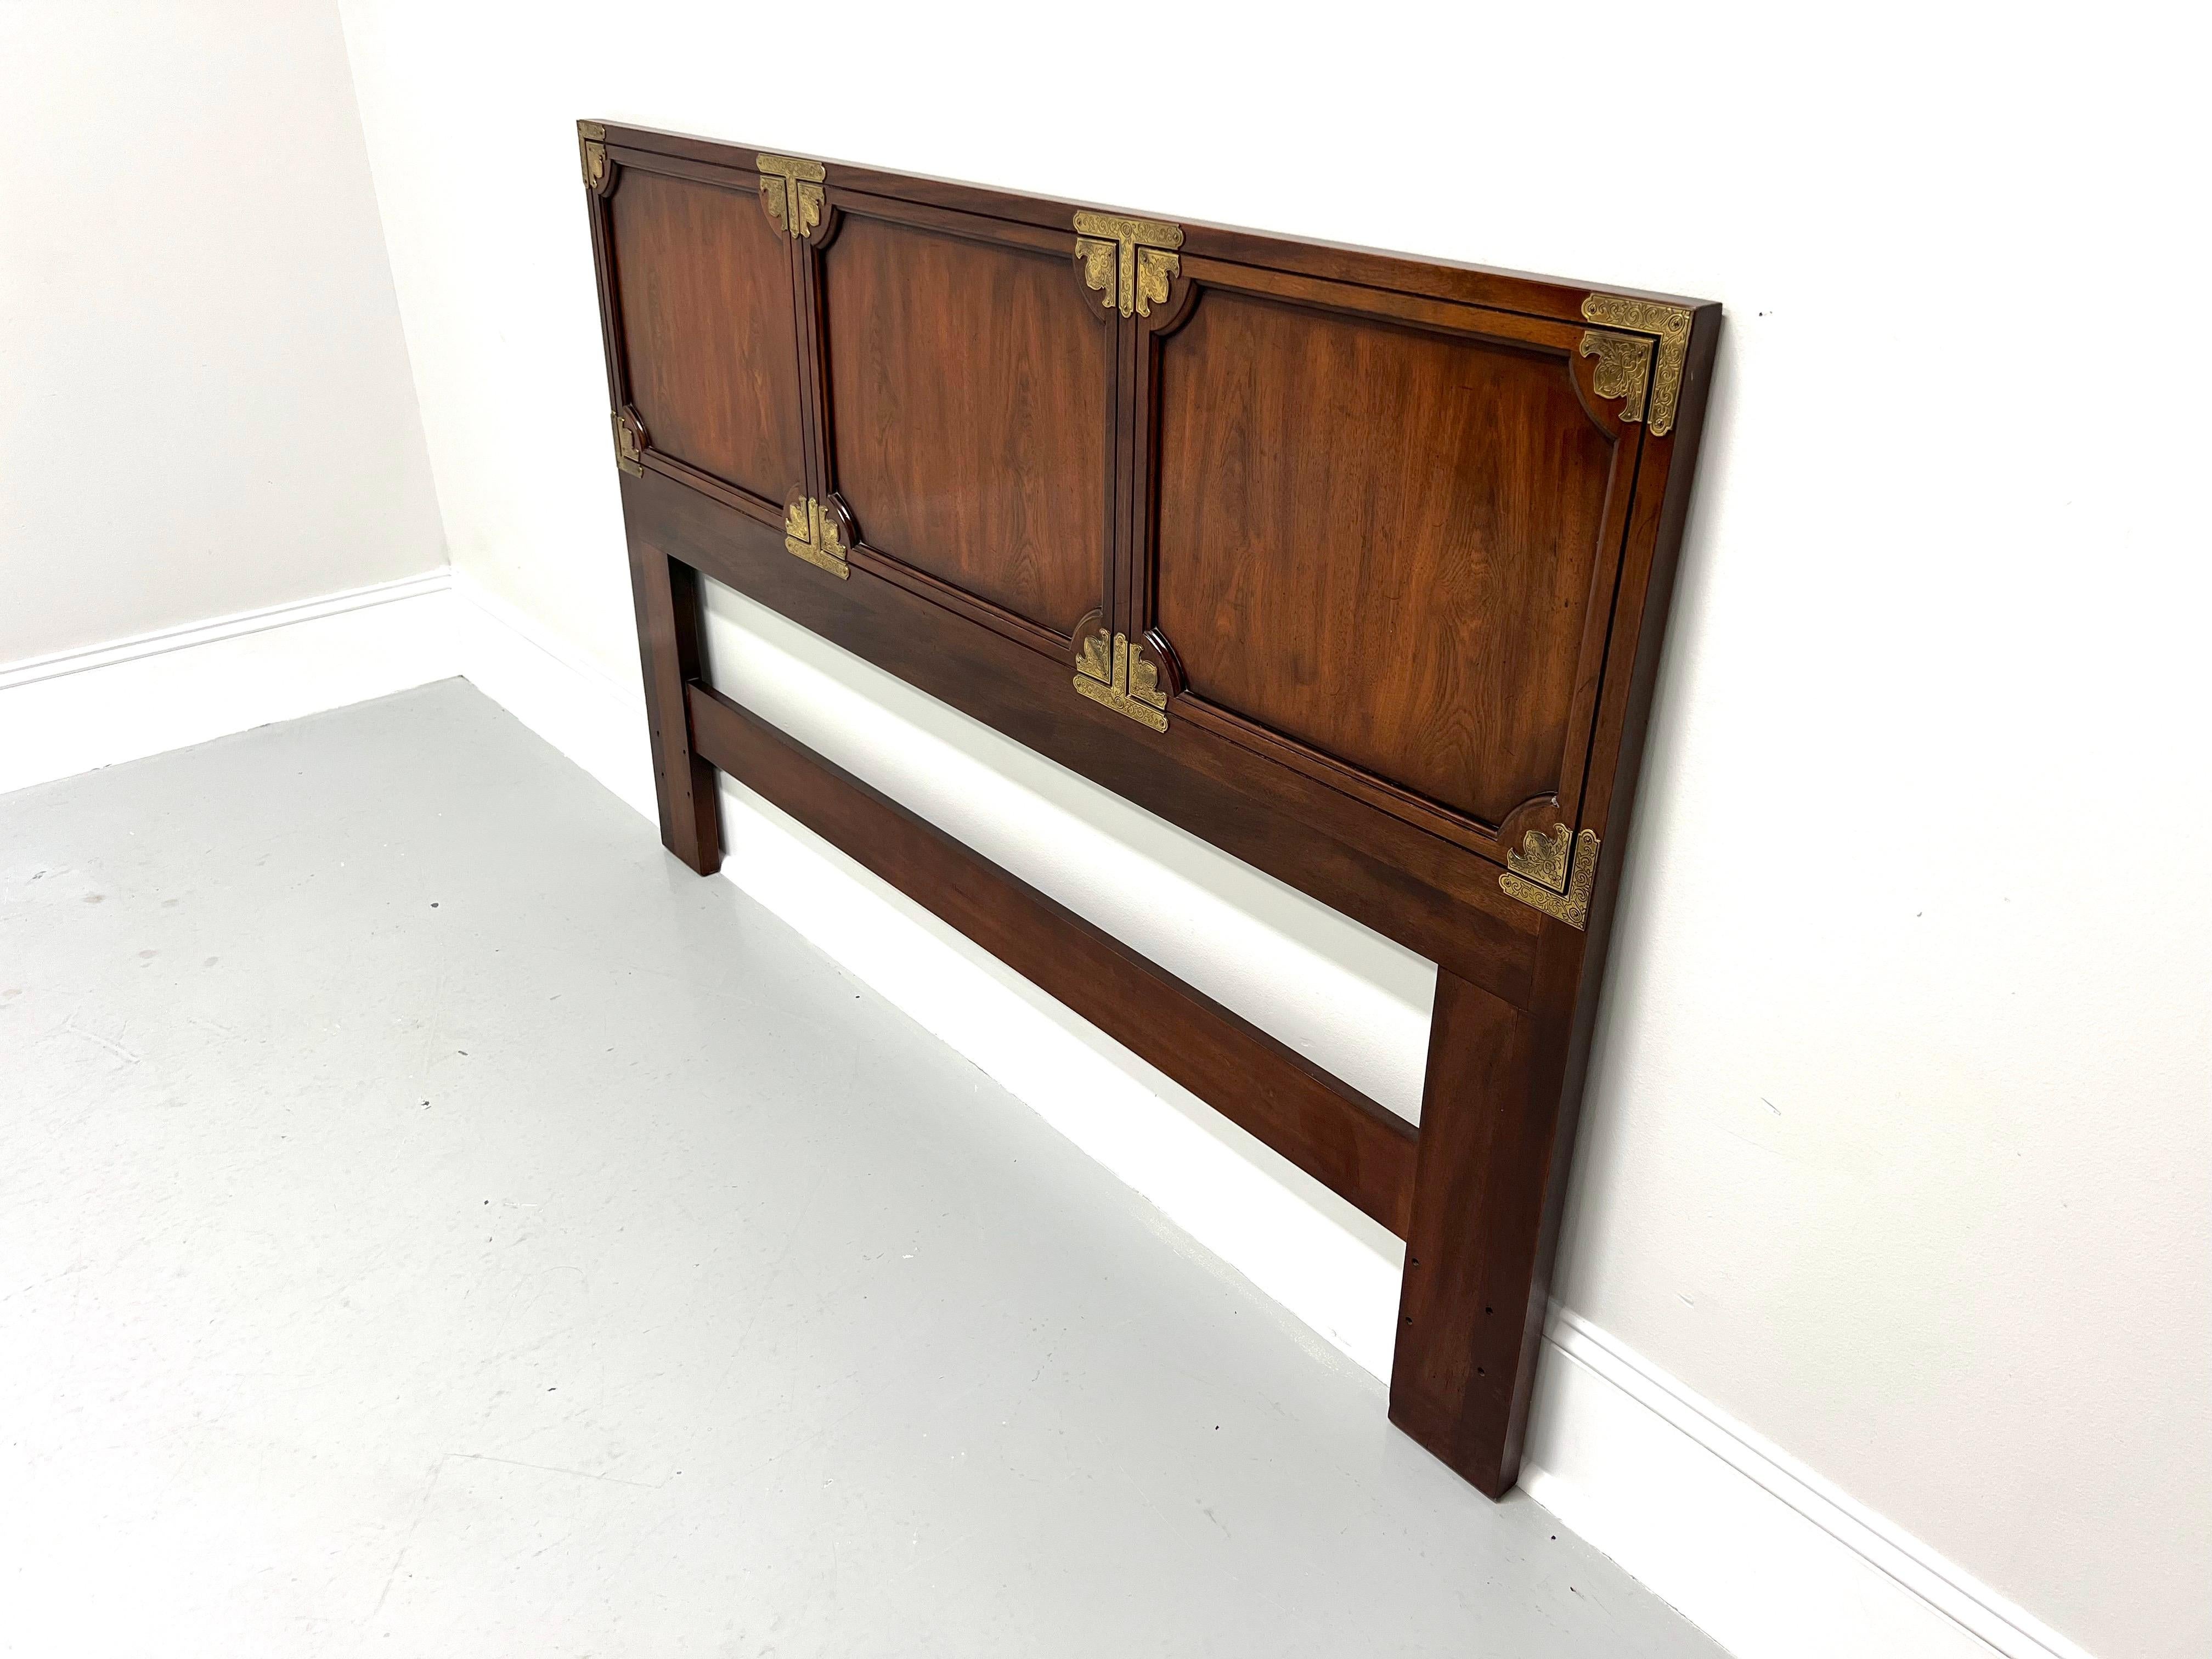 A queen size headboard in the Japanese Tansu Campaign style by Henredon. Solid mahogany forming three panels with decorative brass accents at the corners of each panel. Made in Morganton, North Carolina, USA, in the late 20th Century.

Style #: 